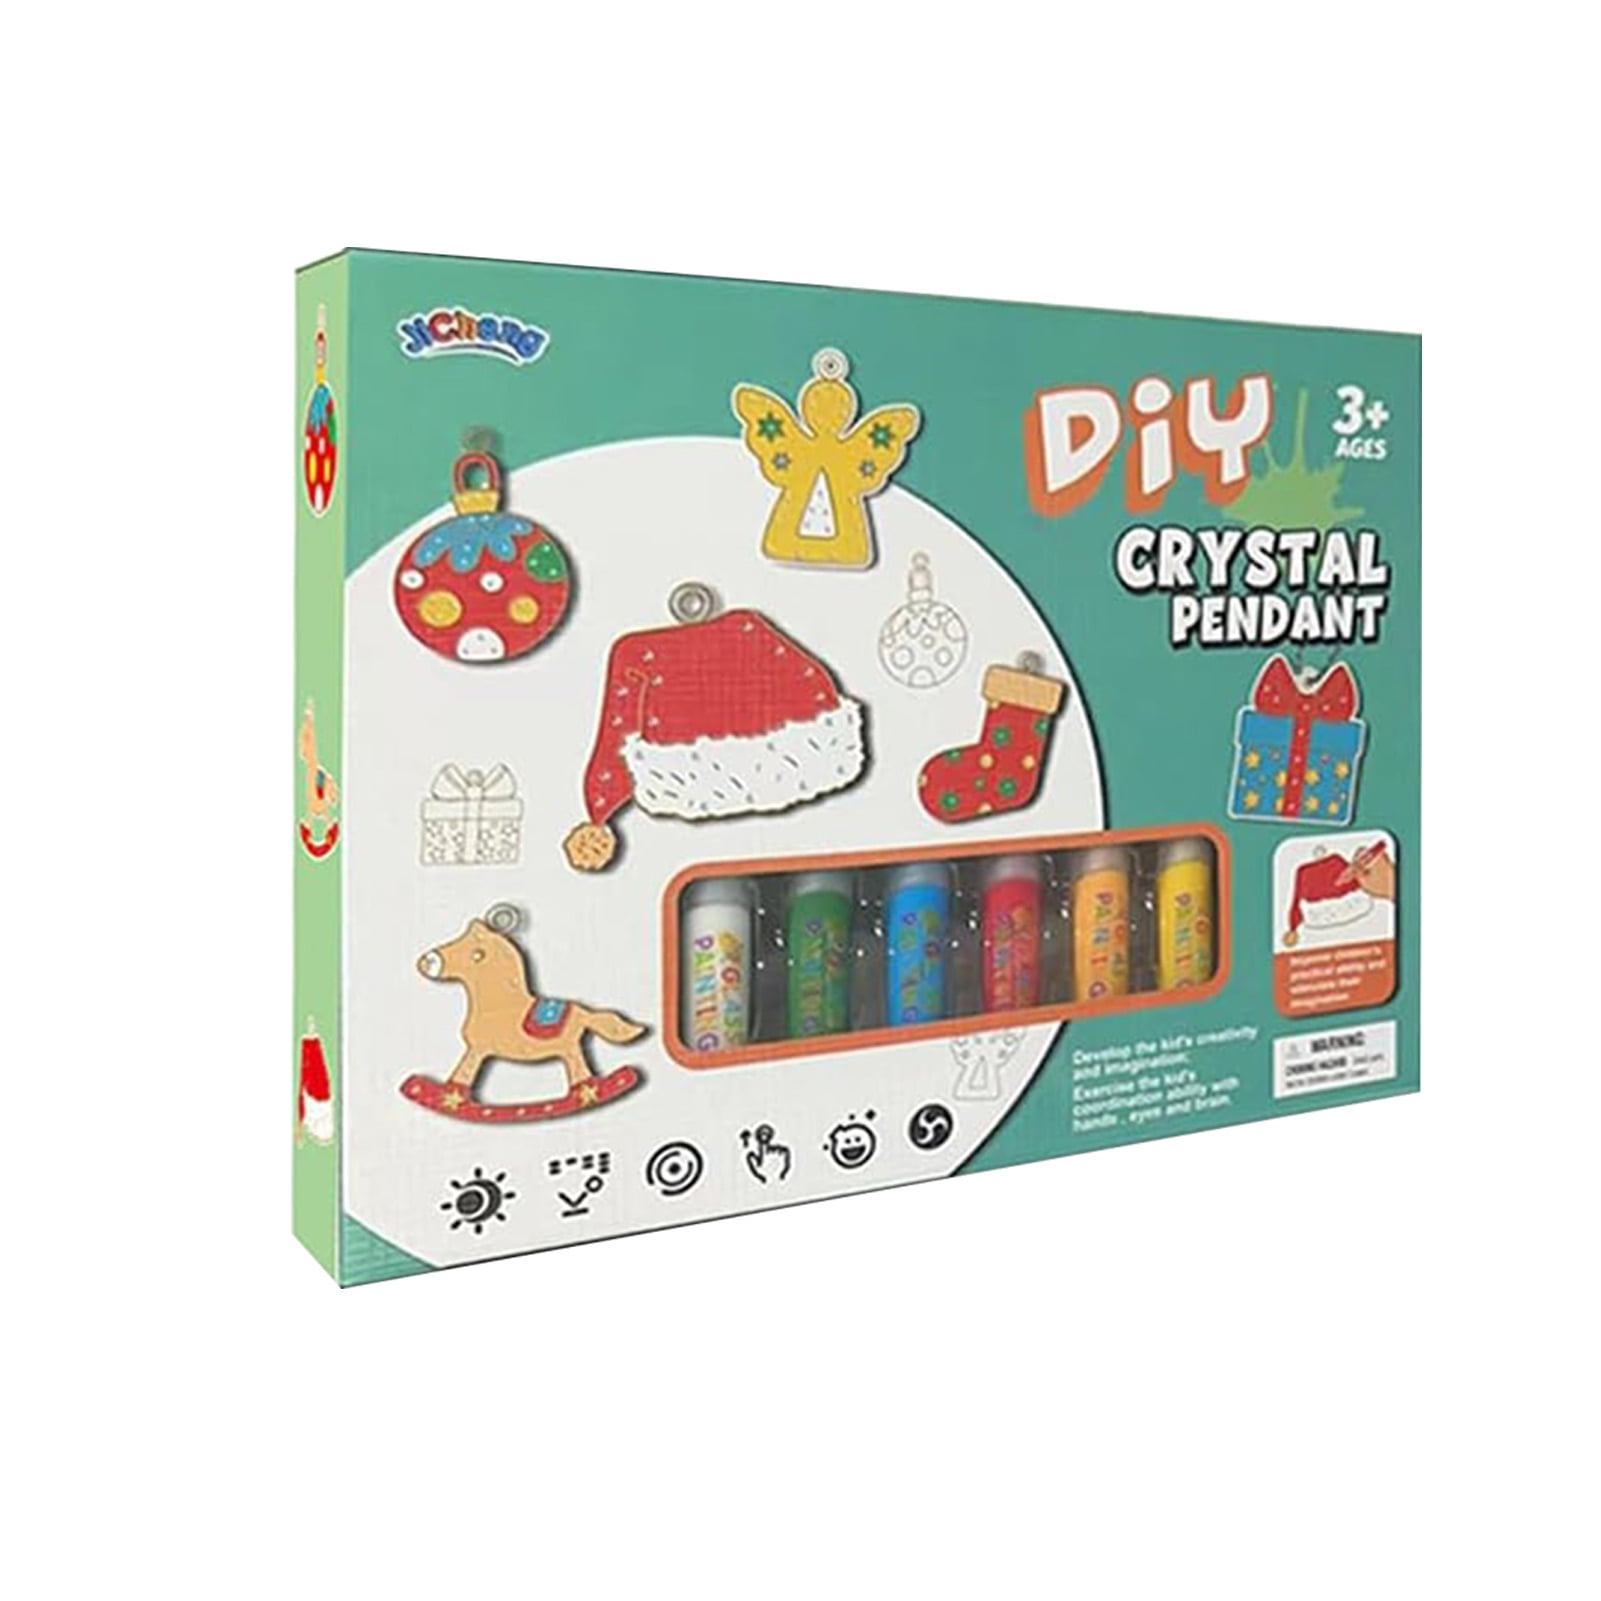 TOYLI Unicorn Stepping Stone Painting Kit for Kids Girls Boys Toddlers Create Your DIY Outside Fun, Includes 2 Painting Brushes and 6 Paints